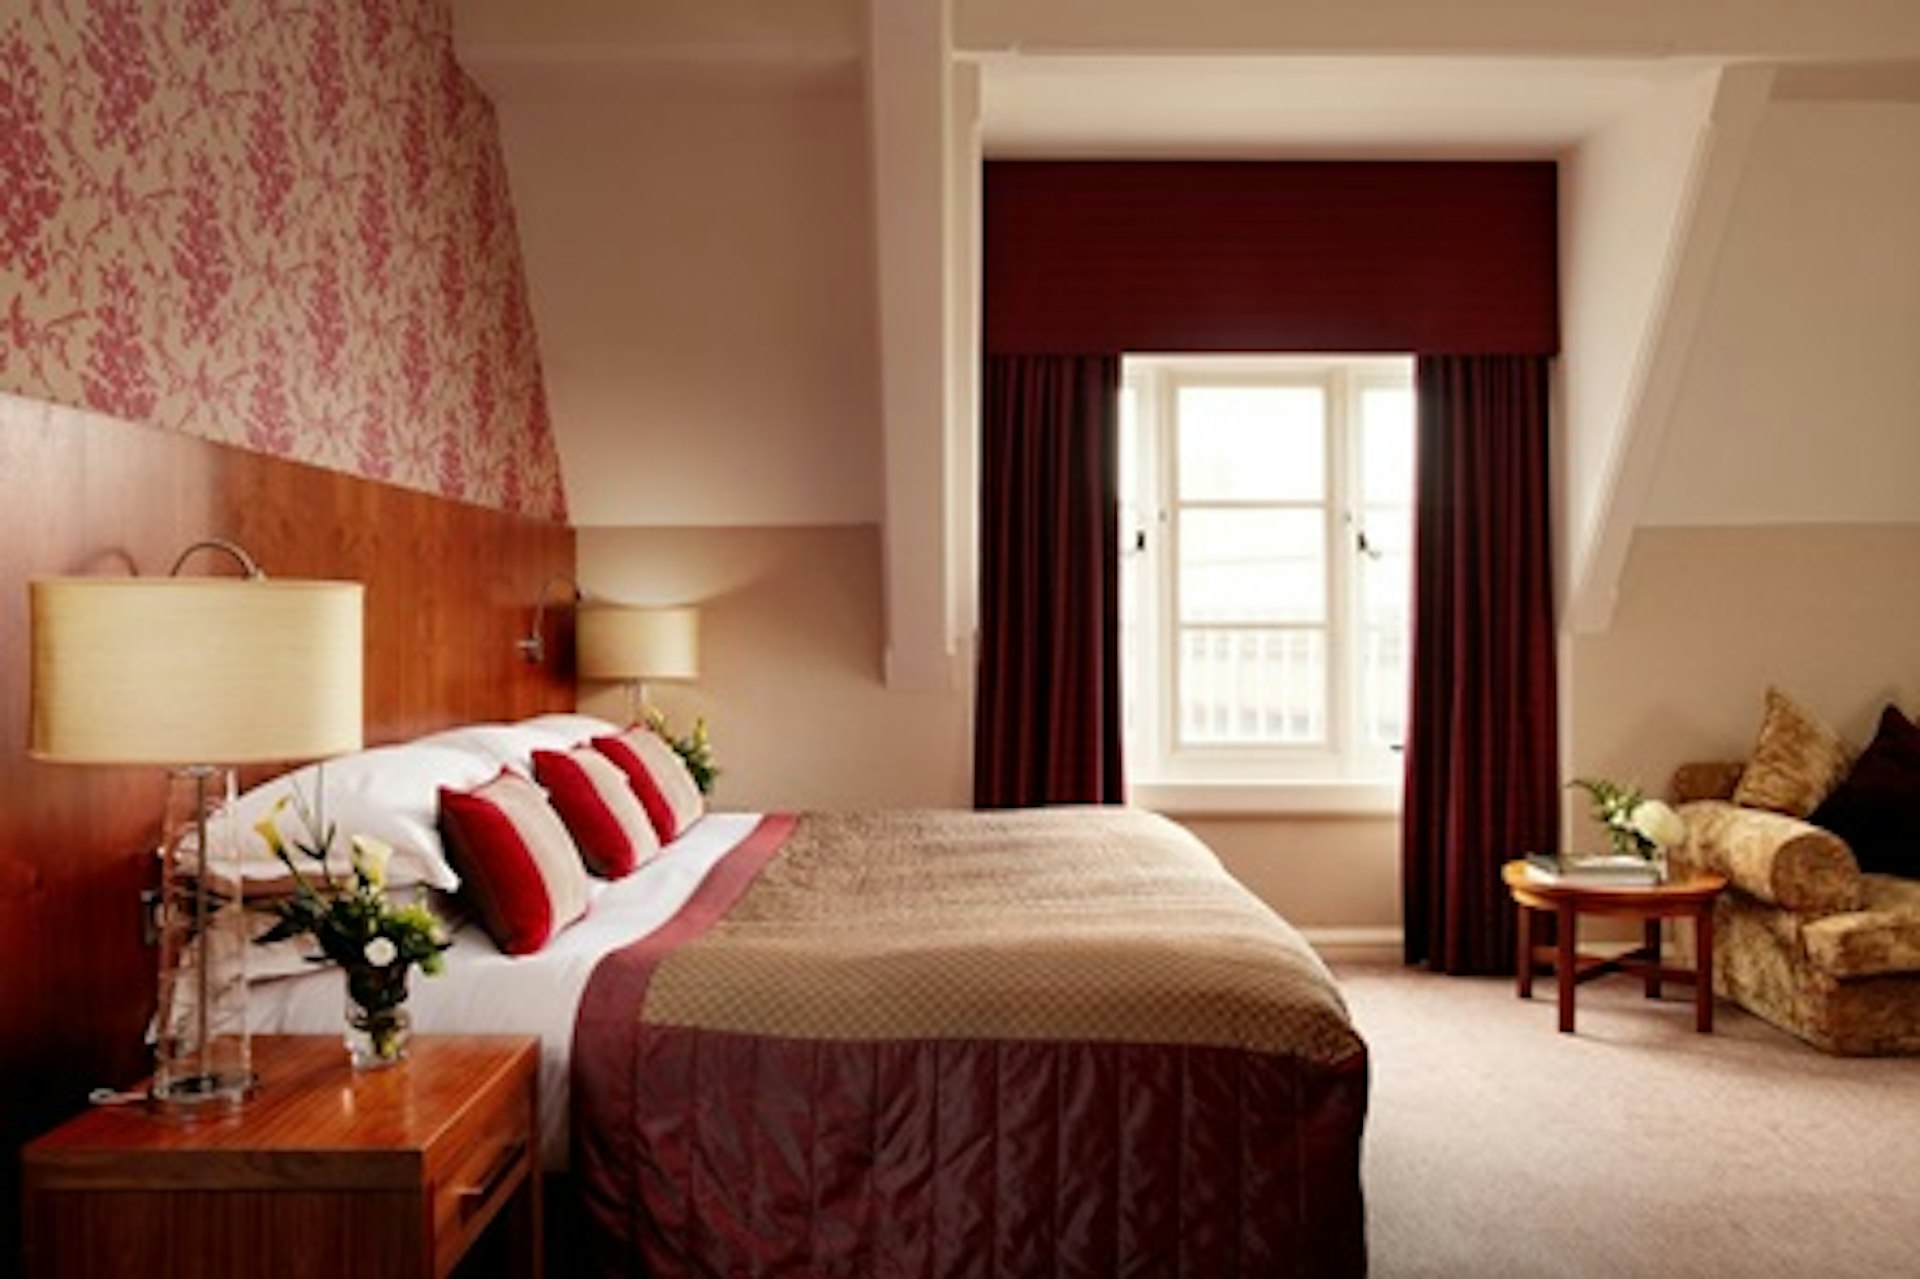 One Night Luxury Break for Two at the 5* Grand, York 1